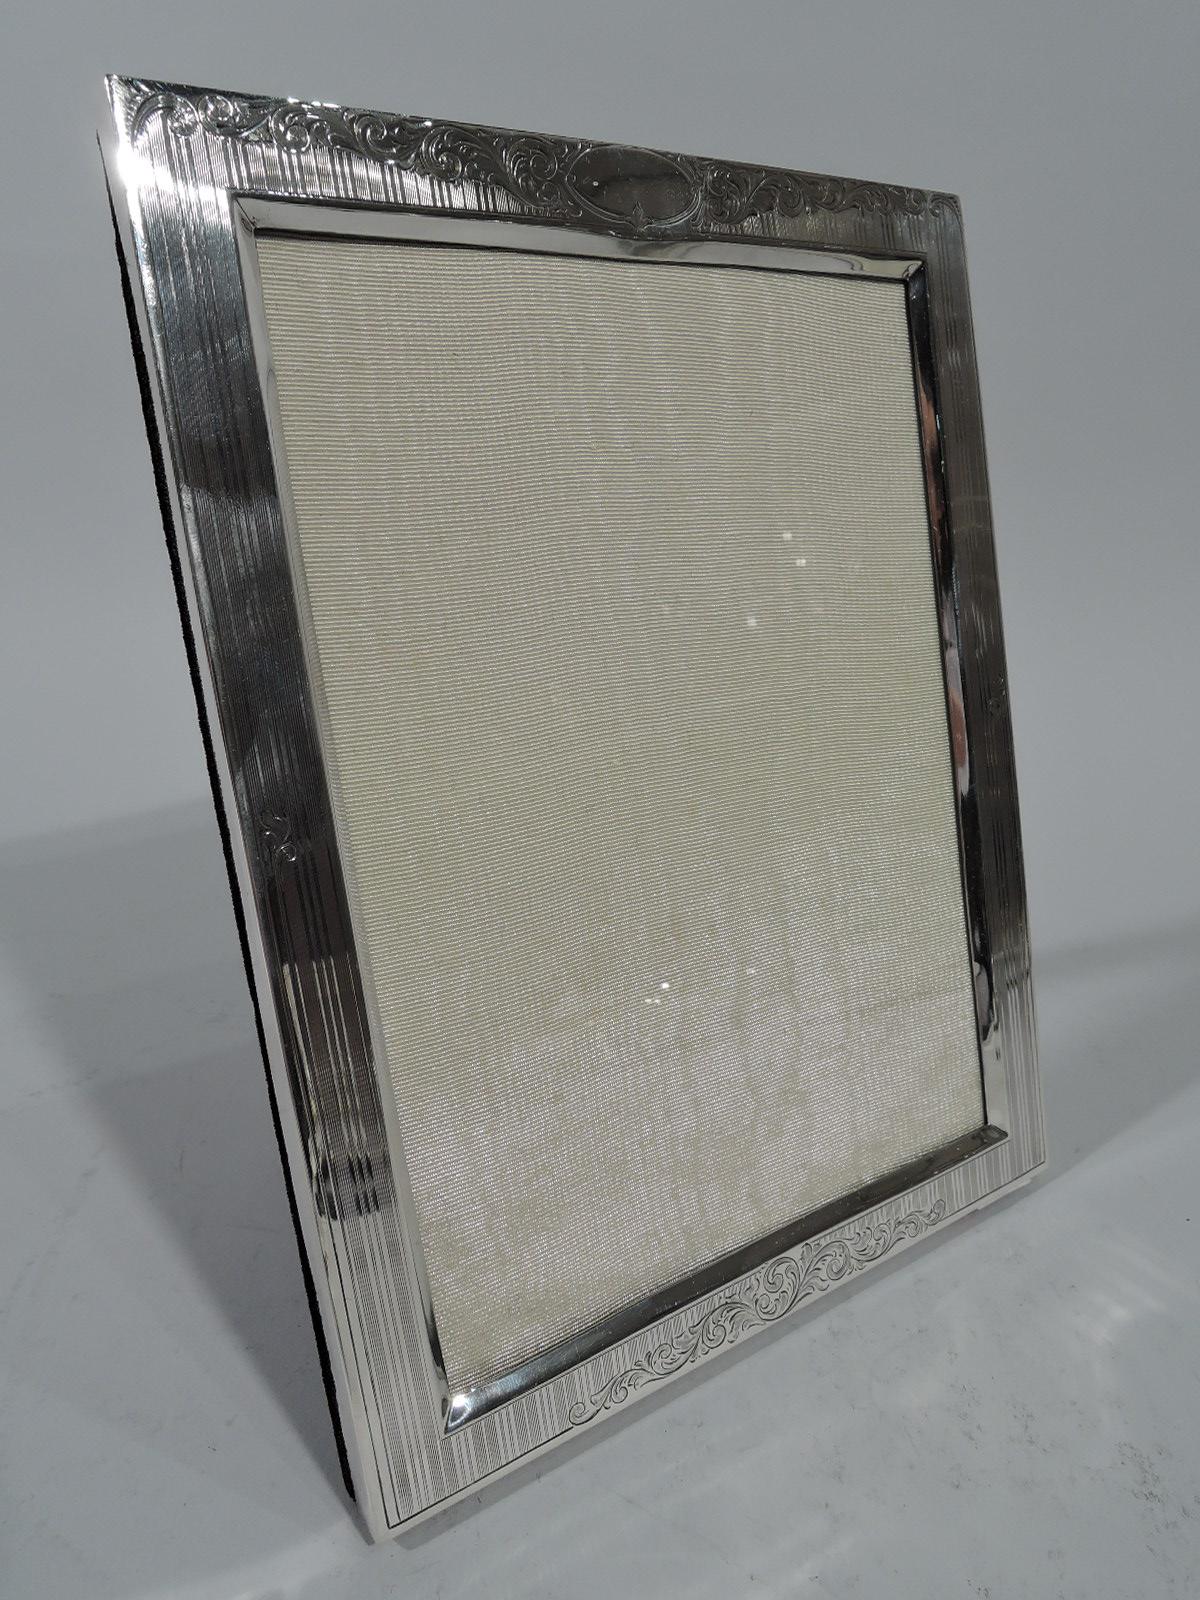 Edwardian sterling silver picture frame. Made by Birks in Montreal. Rectangular window and flat surround with bevelled interior rim. Vertical pinstripes and foliate scrolls on top and bottom rails. Oval frame (vacant). For vertical (portrait)